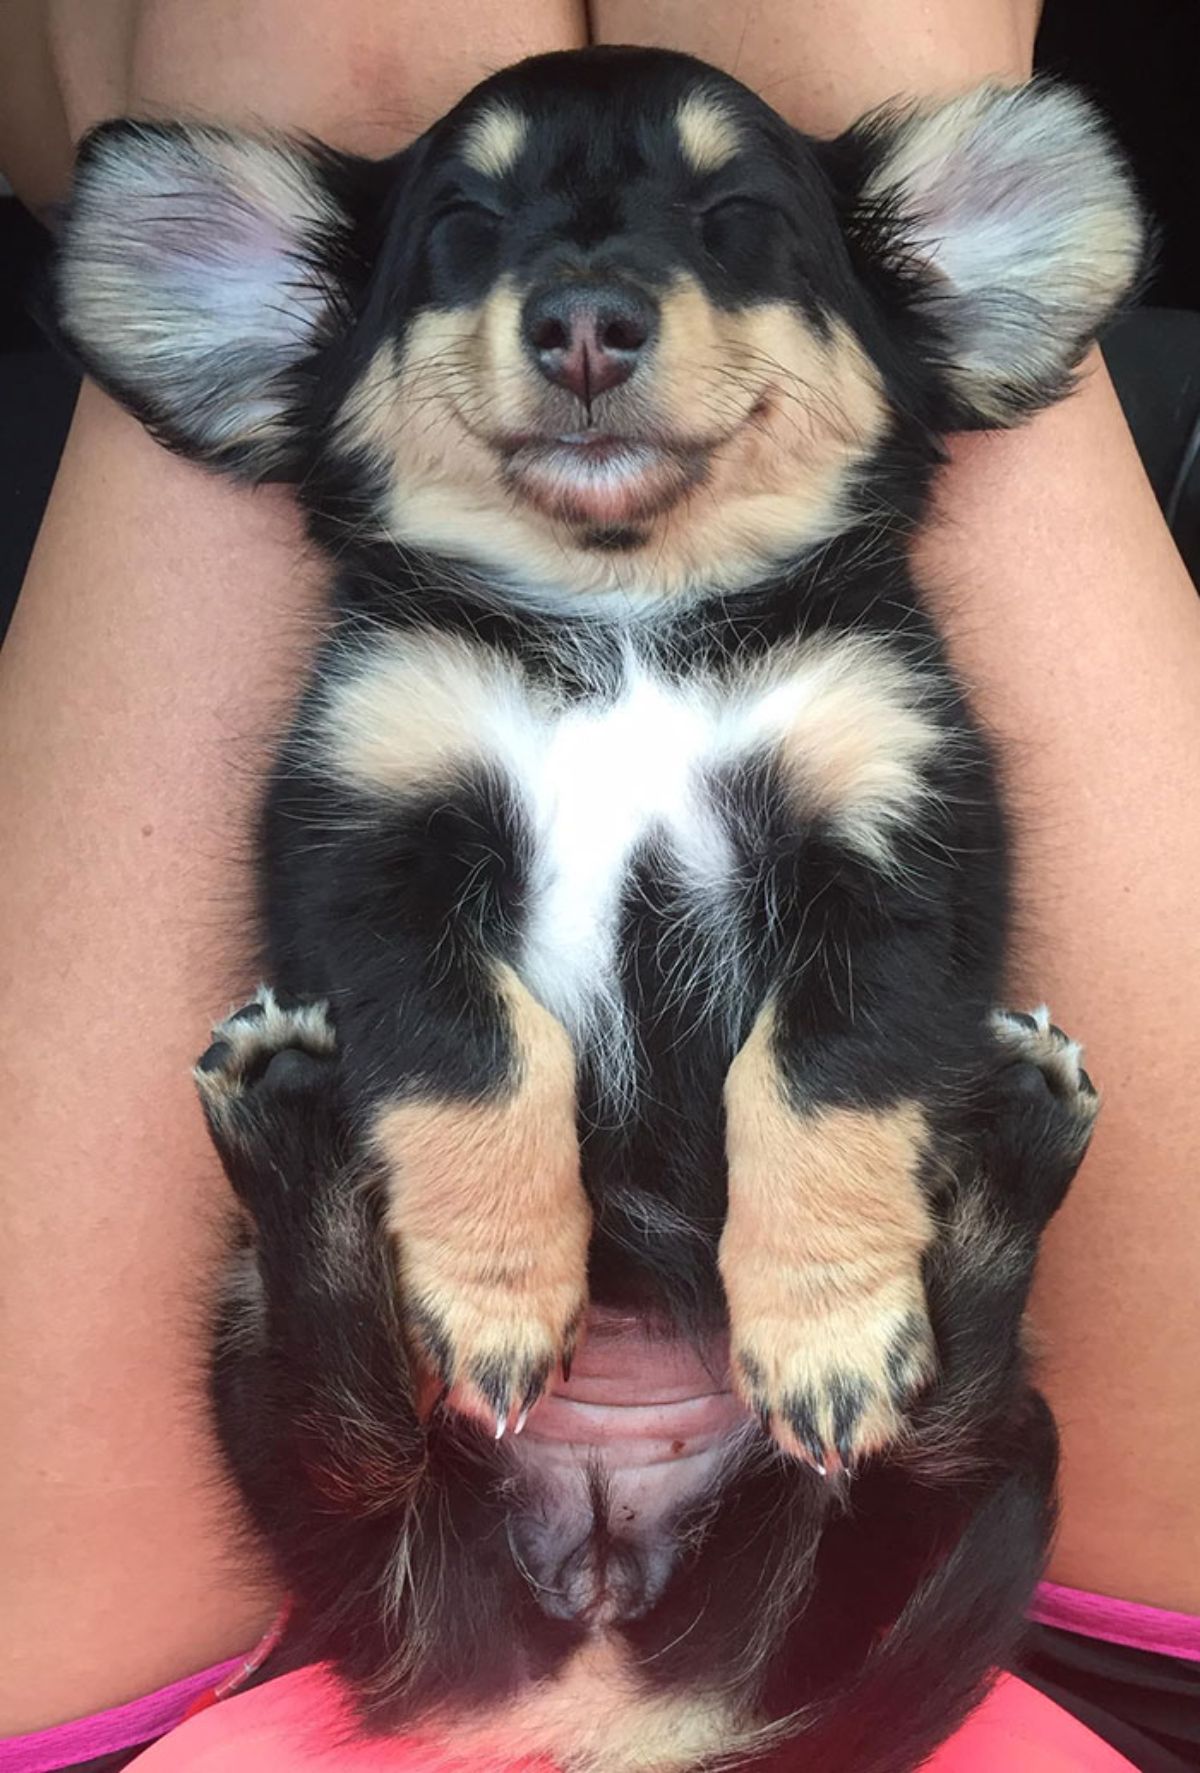 black white and brown puppy sleeping belly up on someone's lap